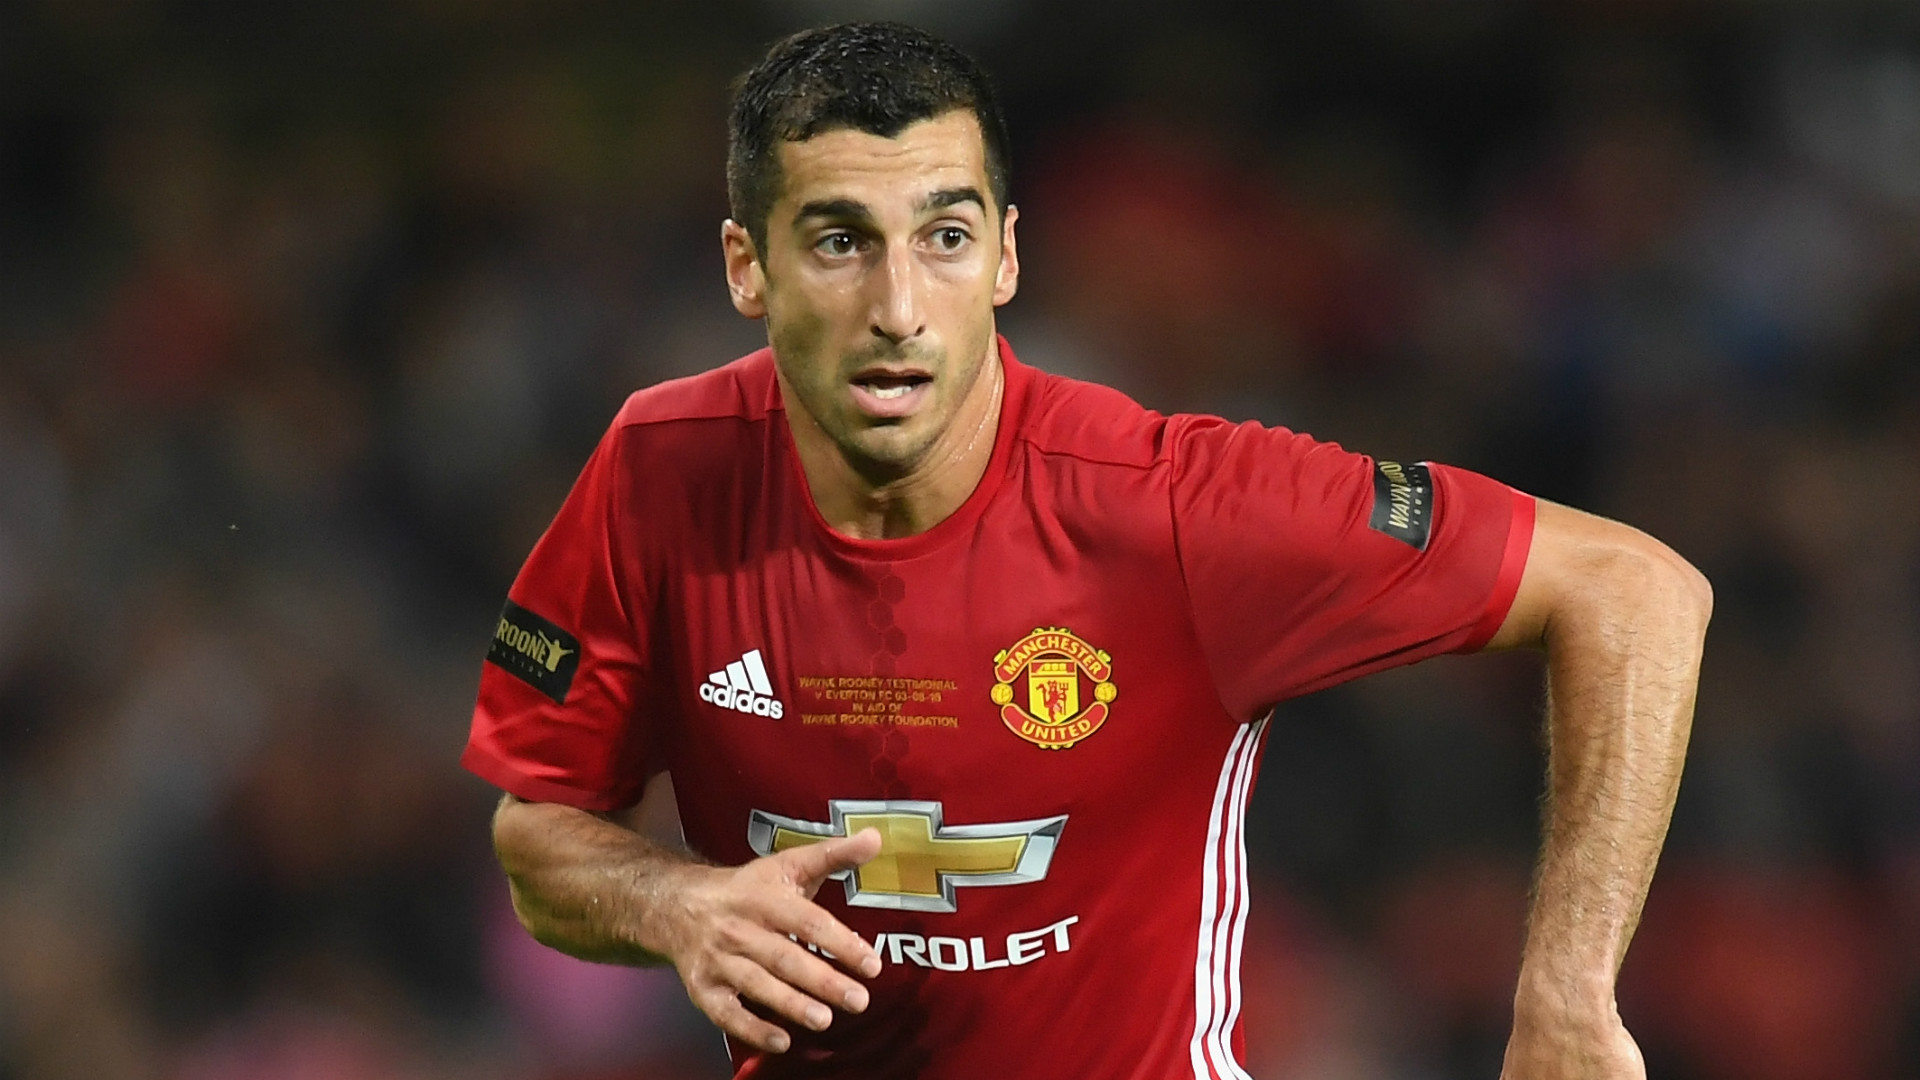 Time for Mkhitaryan to show best form - Mourinho